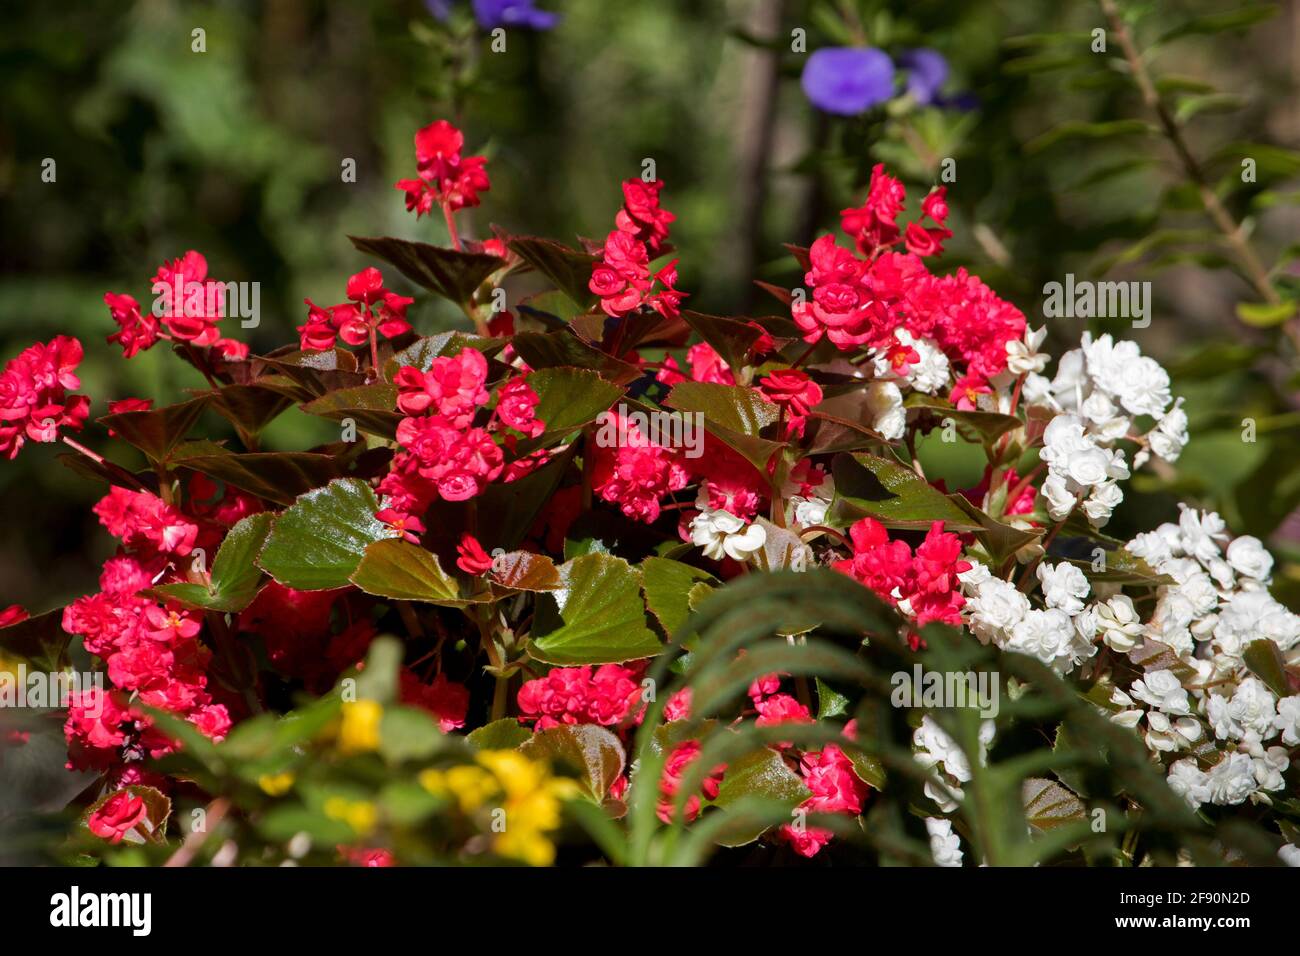 Mass of double red and white flowers of bedding begonias, Begonia semperflorens against a dark green background Stock Photo